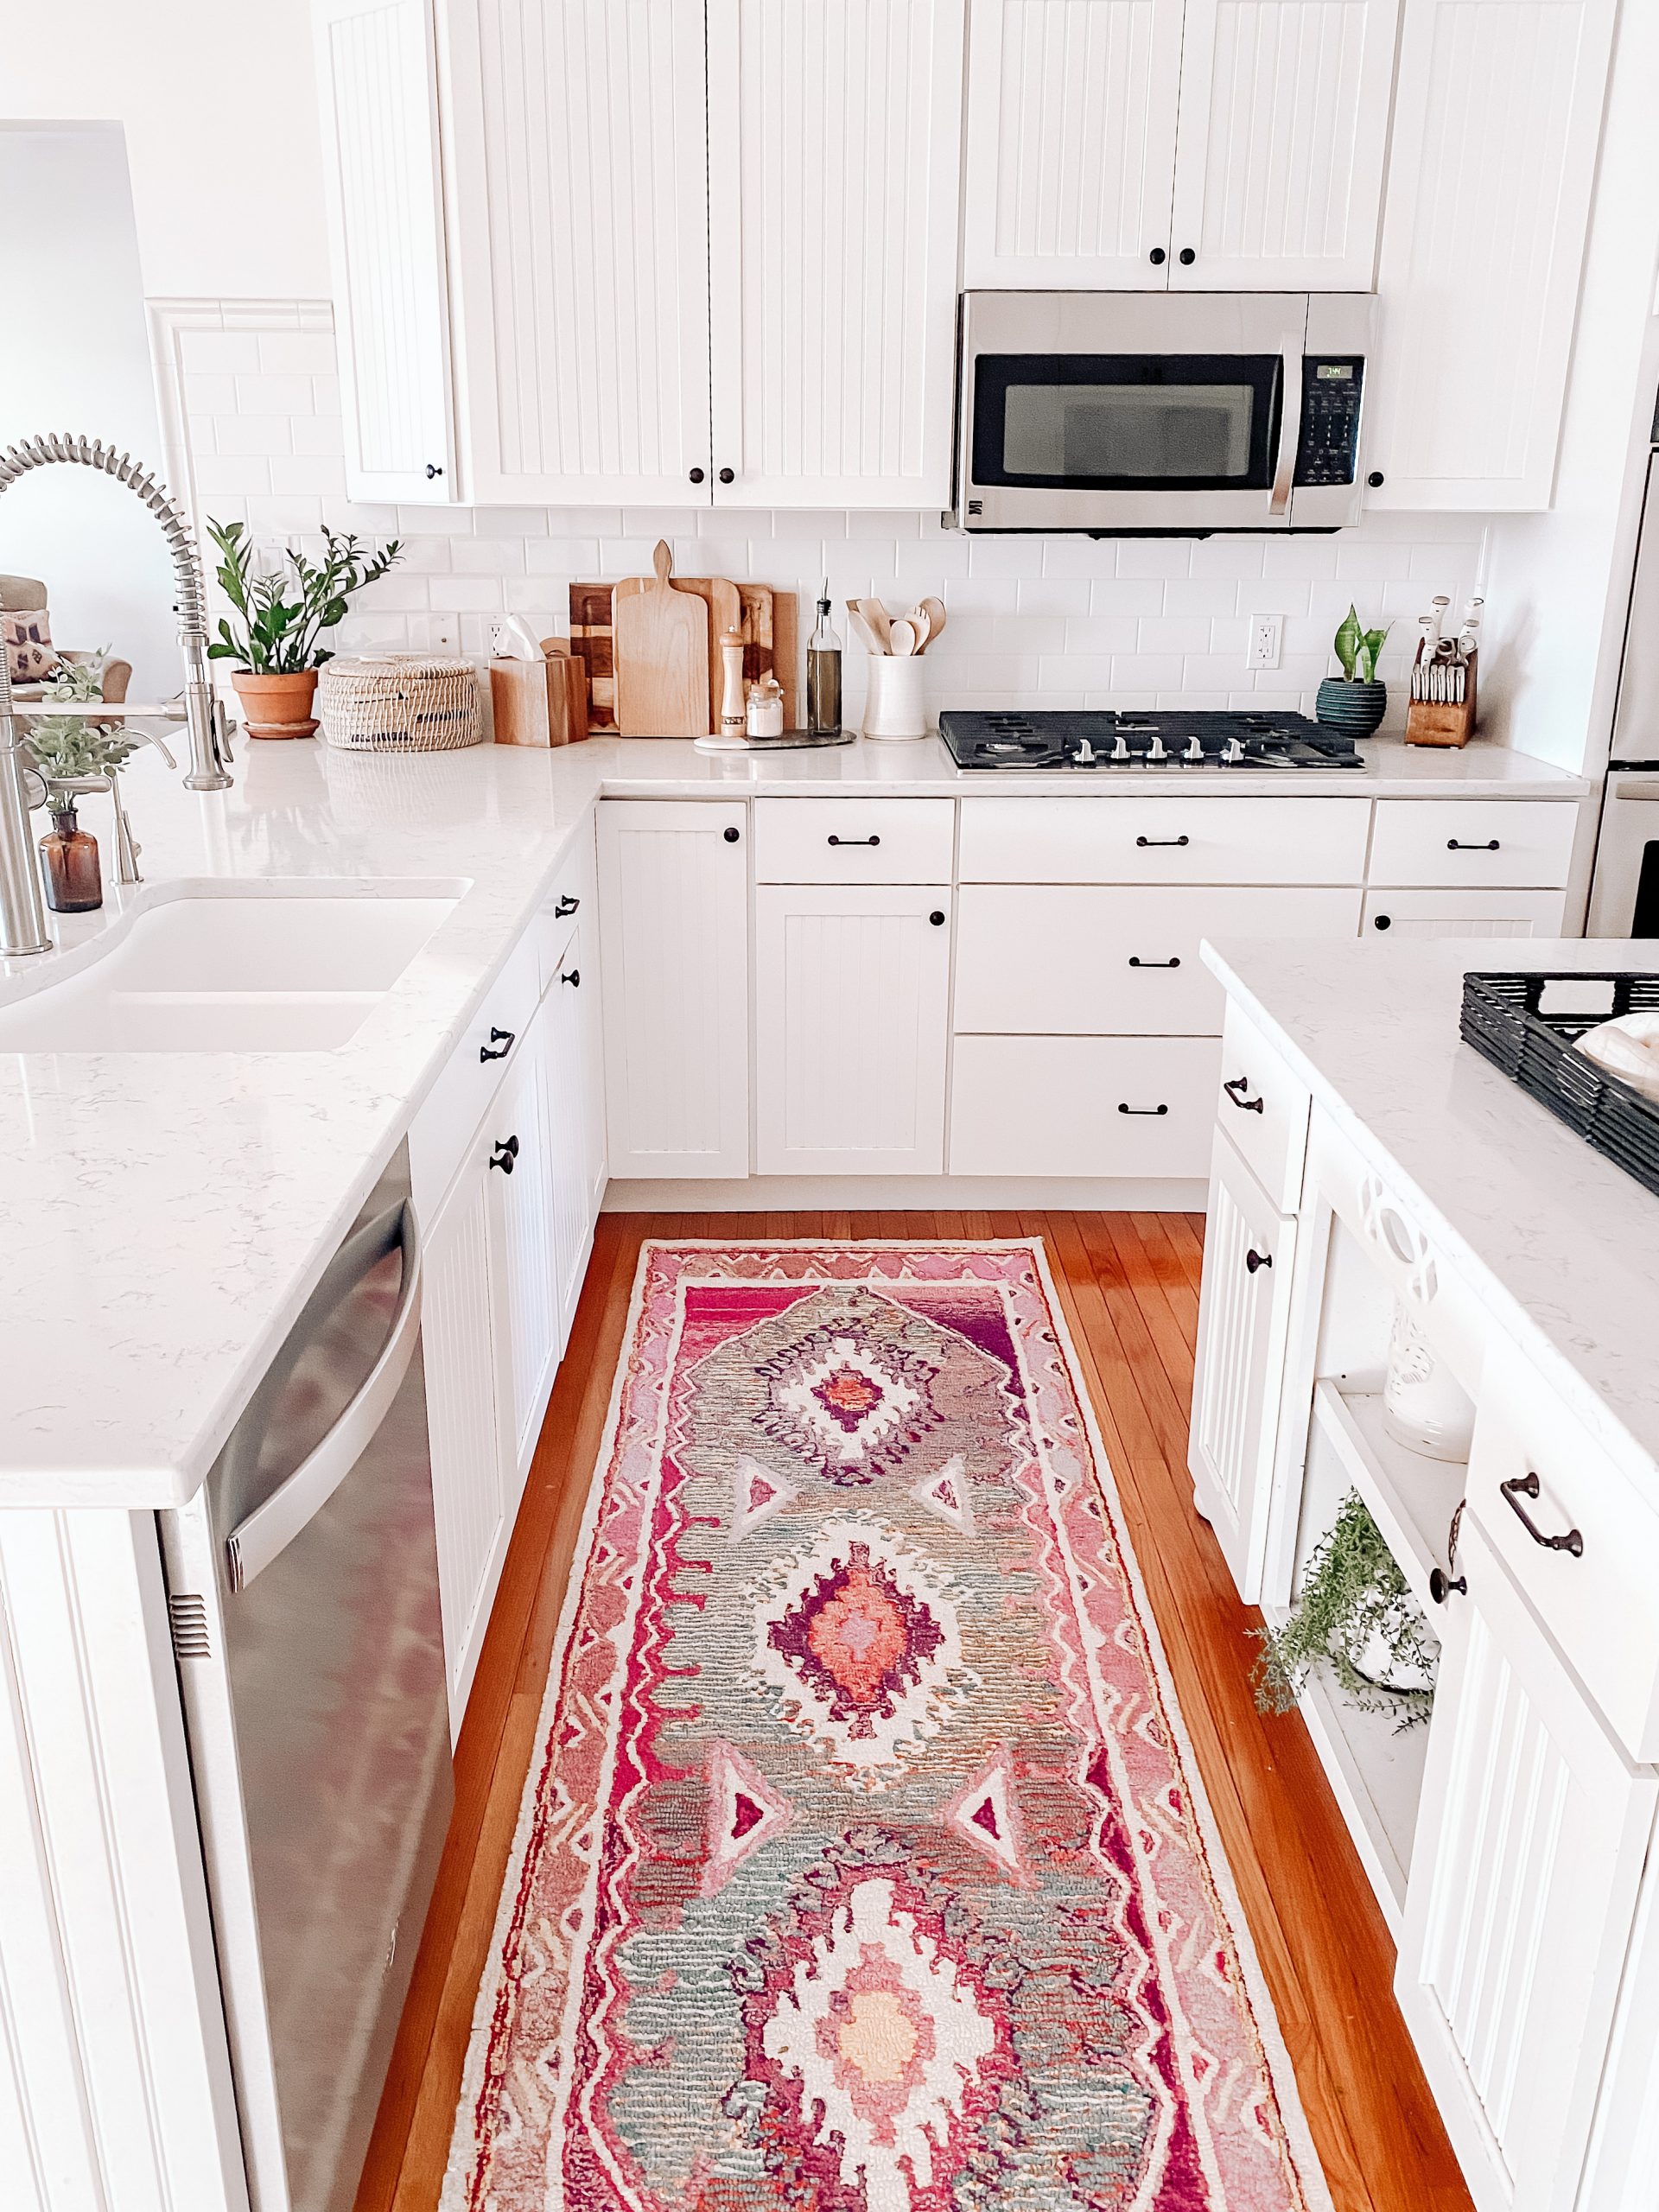 The Best Rugs For Your Kitchen Usa, Rug In Kitchen With Hardwood Floor